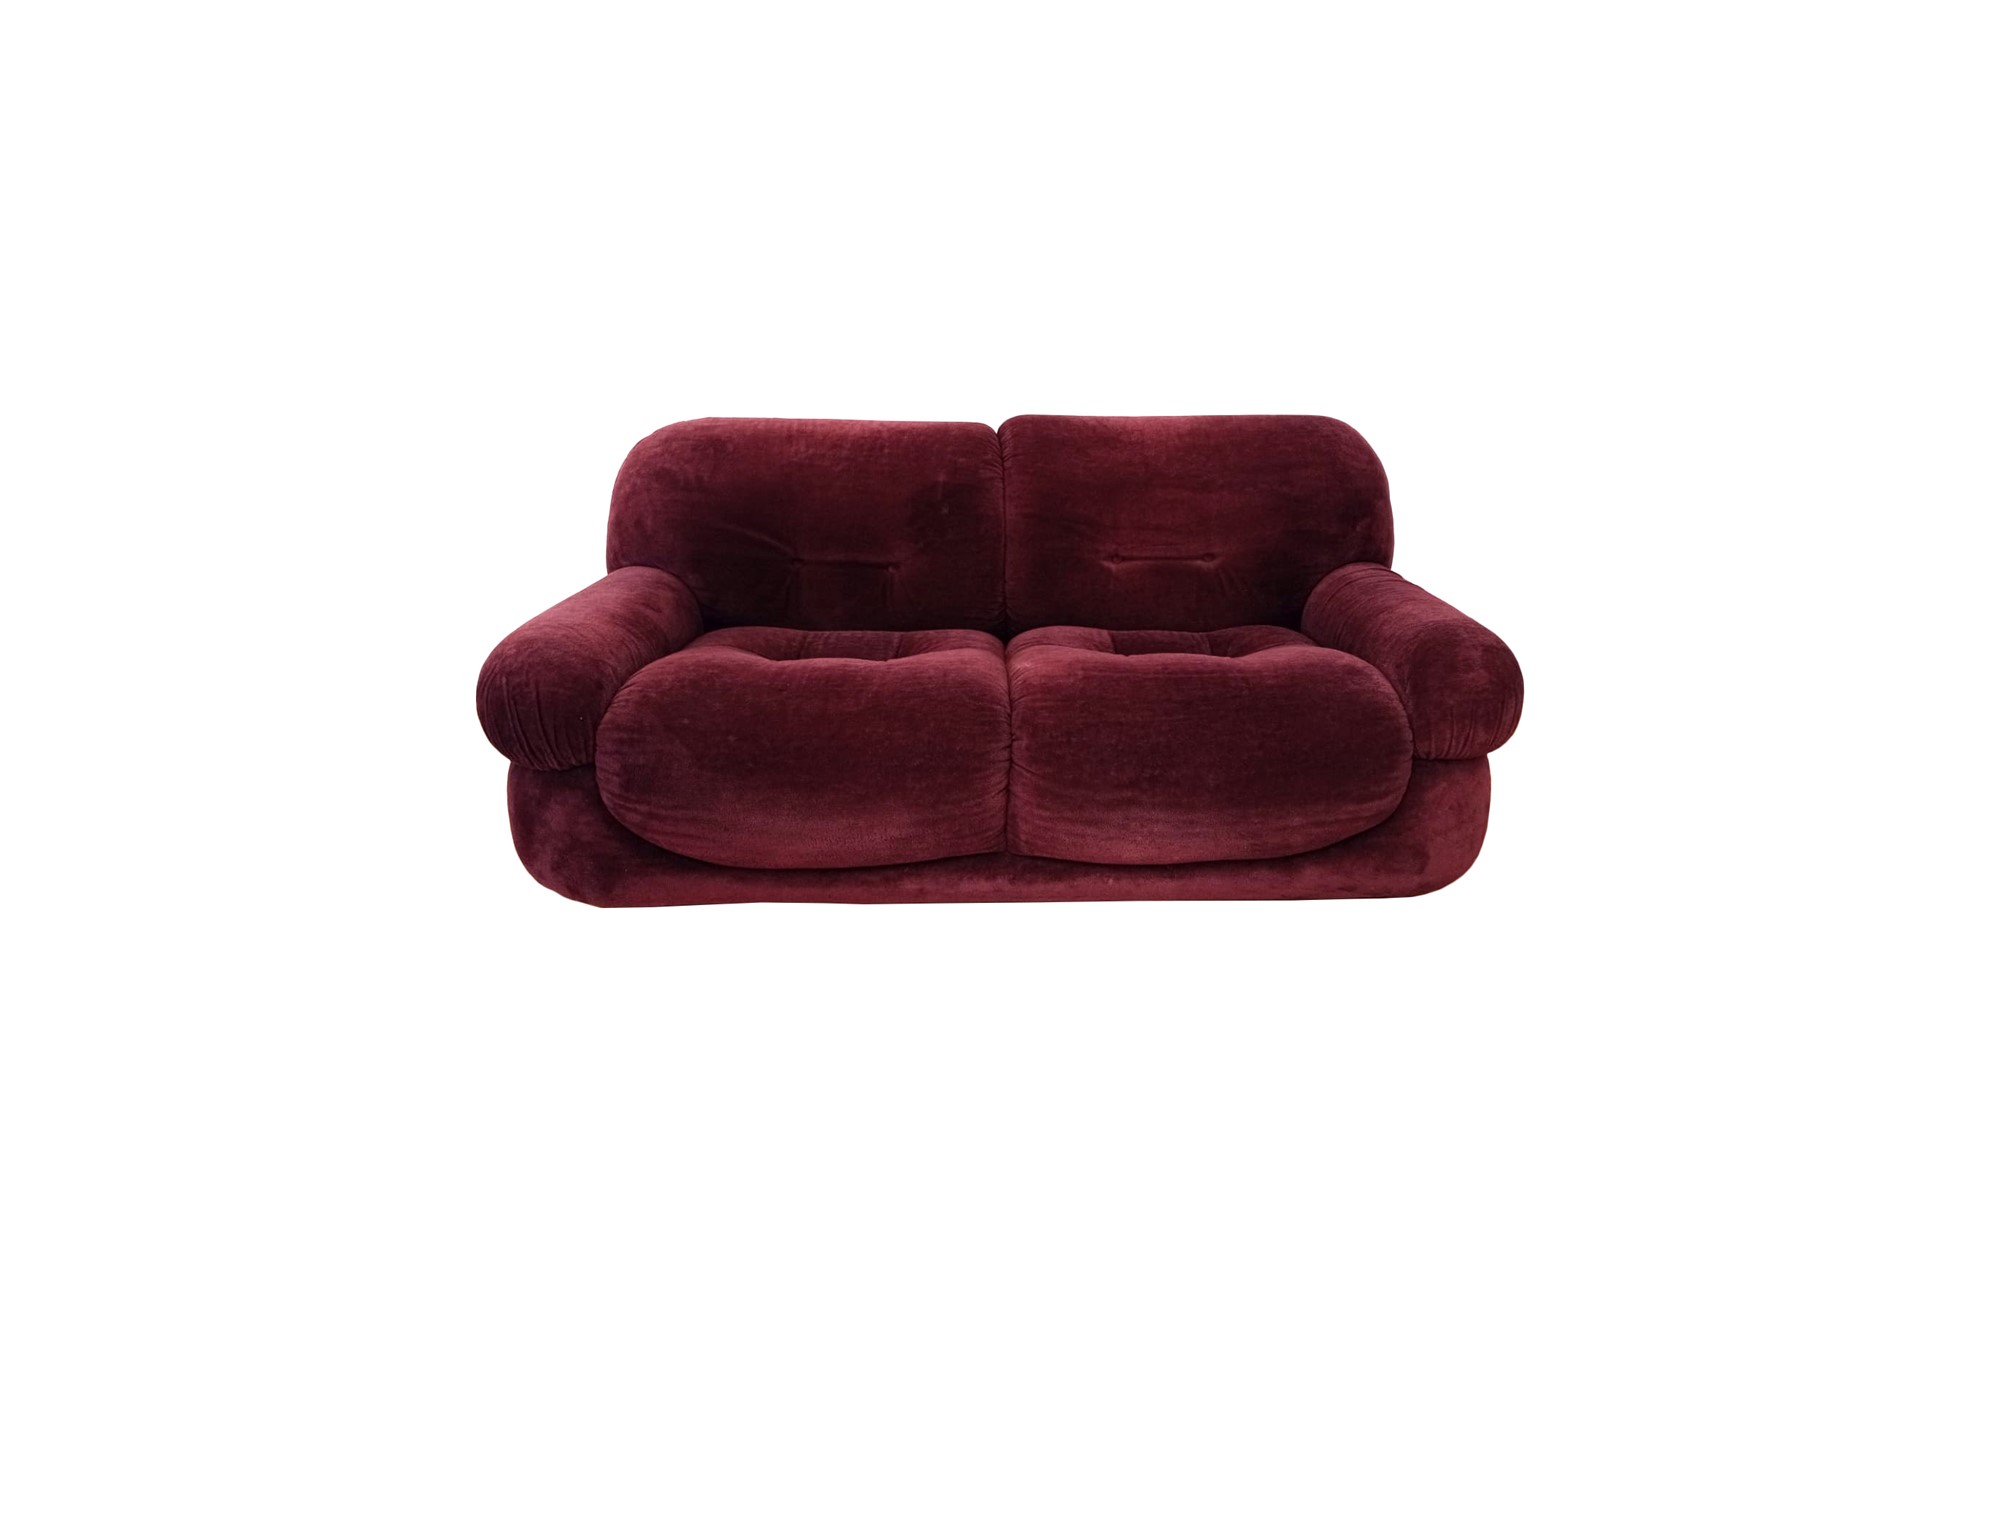 Two seater Sapporo sofa - Image 8 of 11